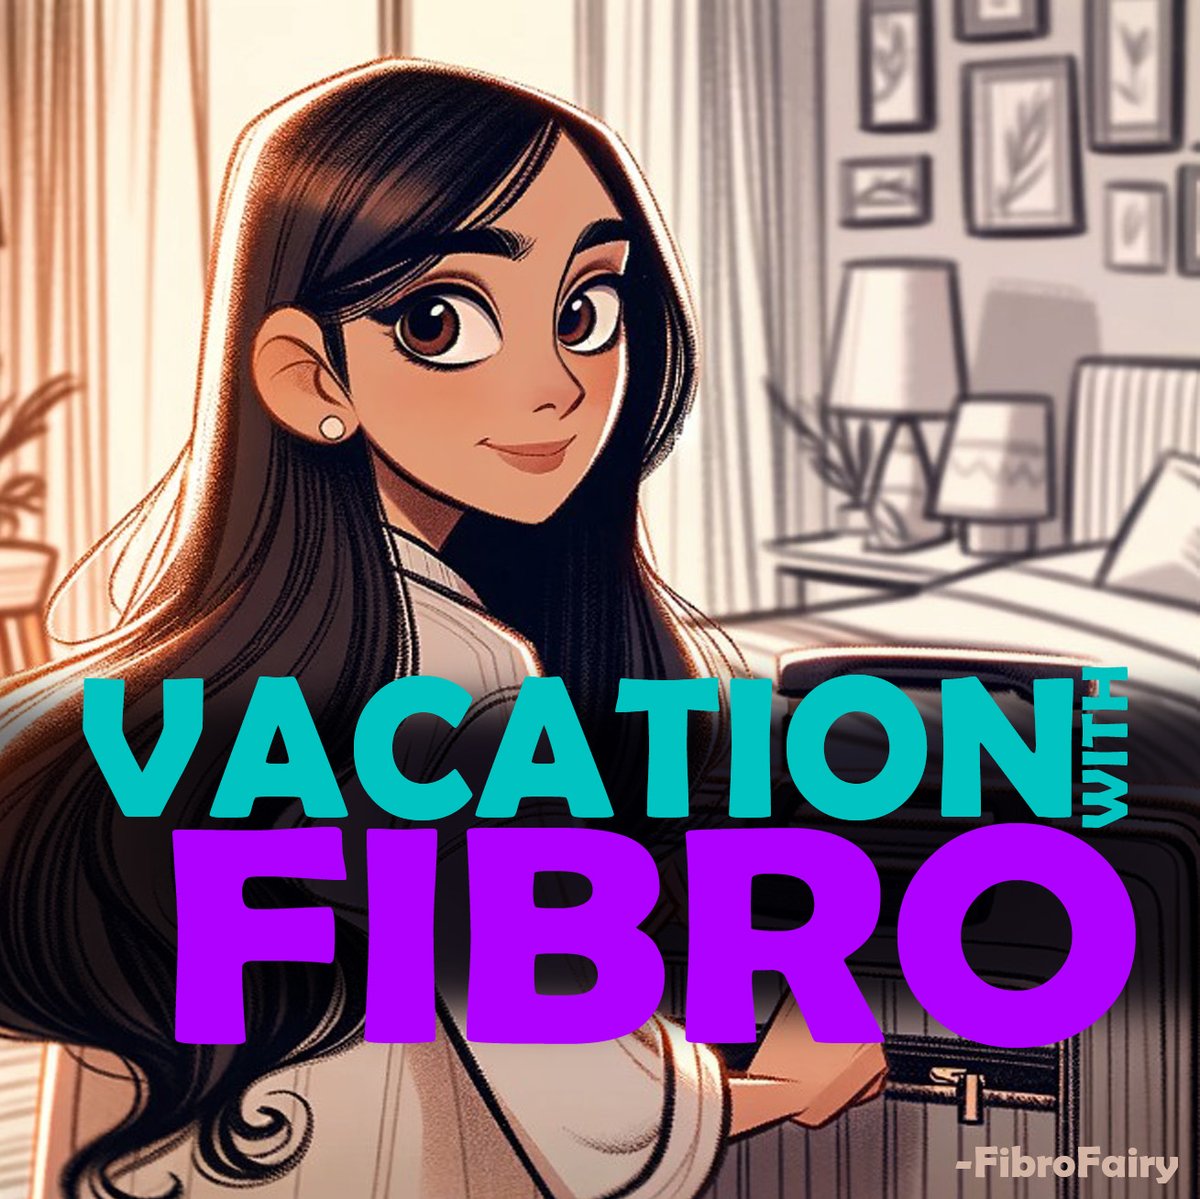 I'm headed on a week's vacation.🏛️
But with #Fibromyalgia #ChronicPain, it's always a whirlwind of emotions:
Excited and grateful, yet extremely anxious about the pain that might ruin it all..😨
With #Fibro, even the thought of a vacation is hard to enjoy, but here's to hoping!🤞